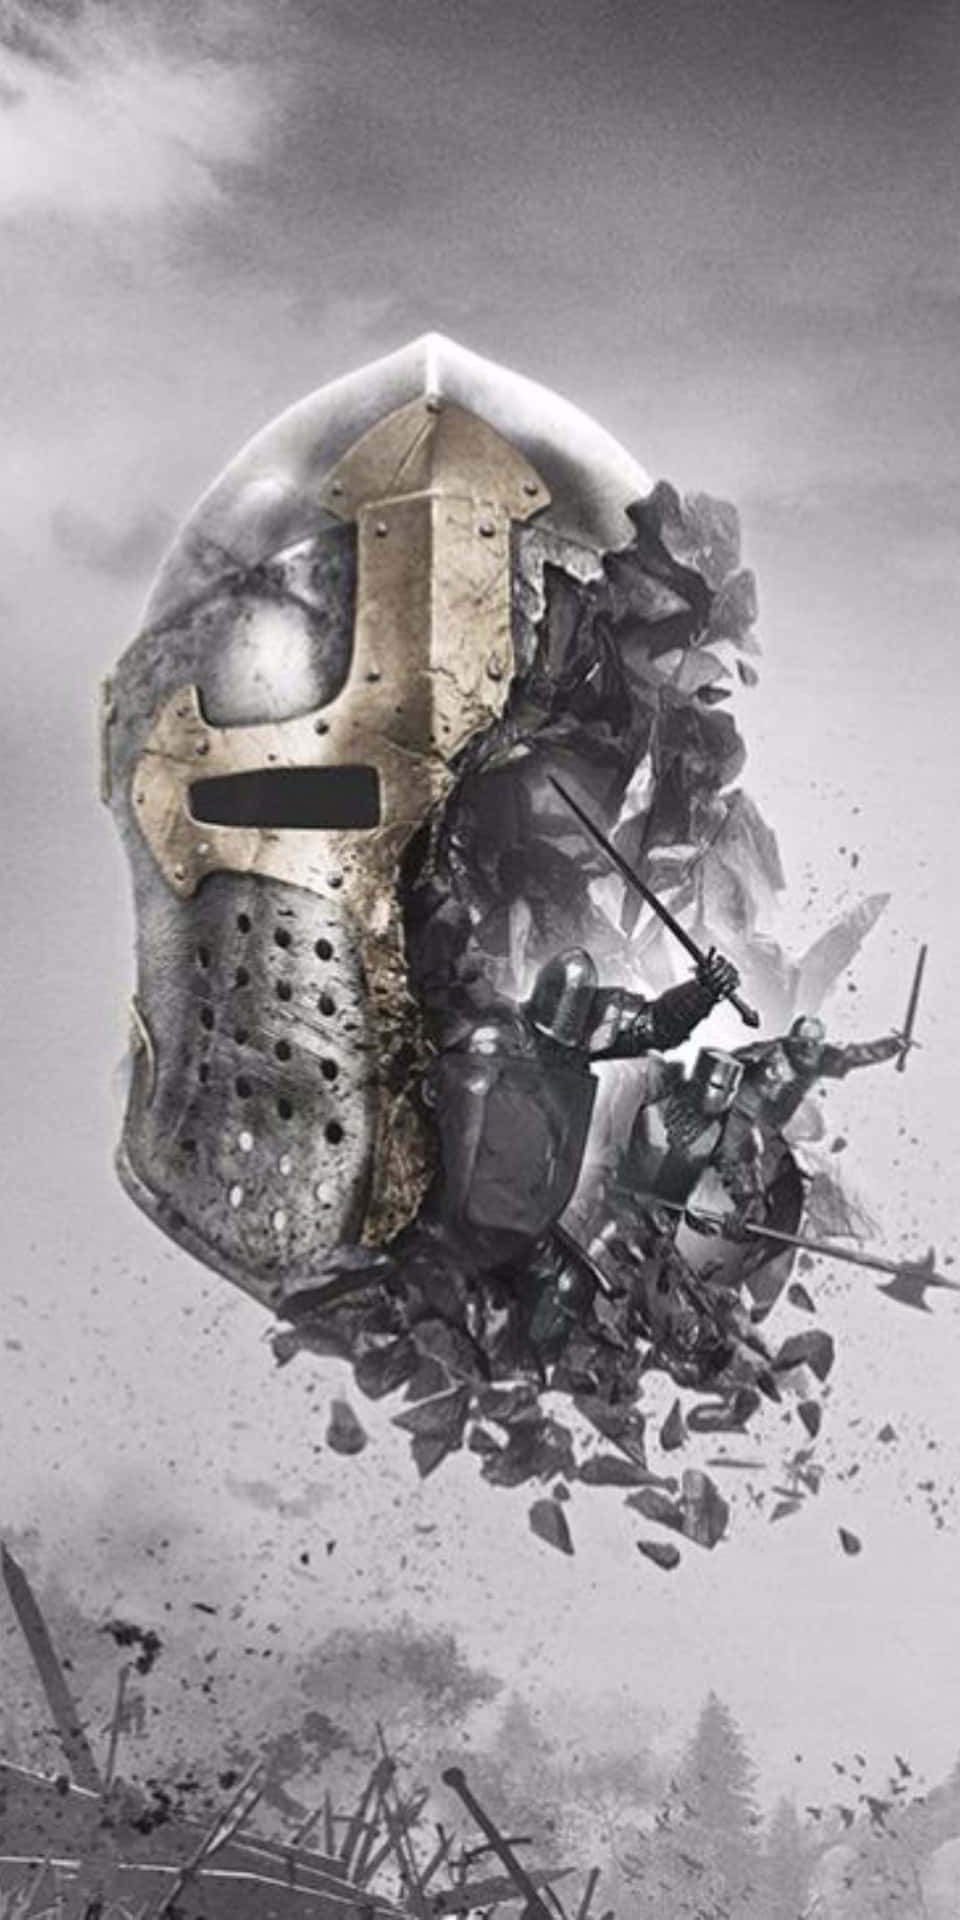 Pixel 3 For Honor Fading Knight’s Helmet Background